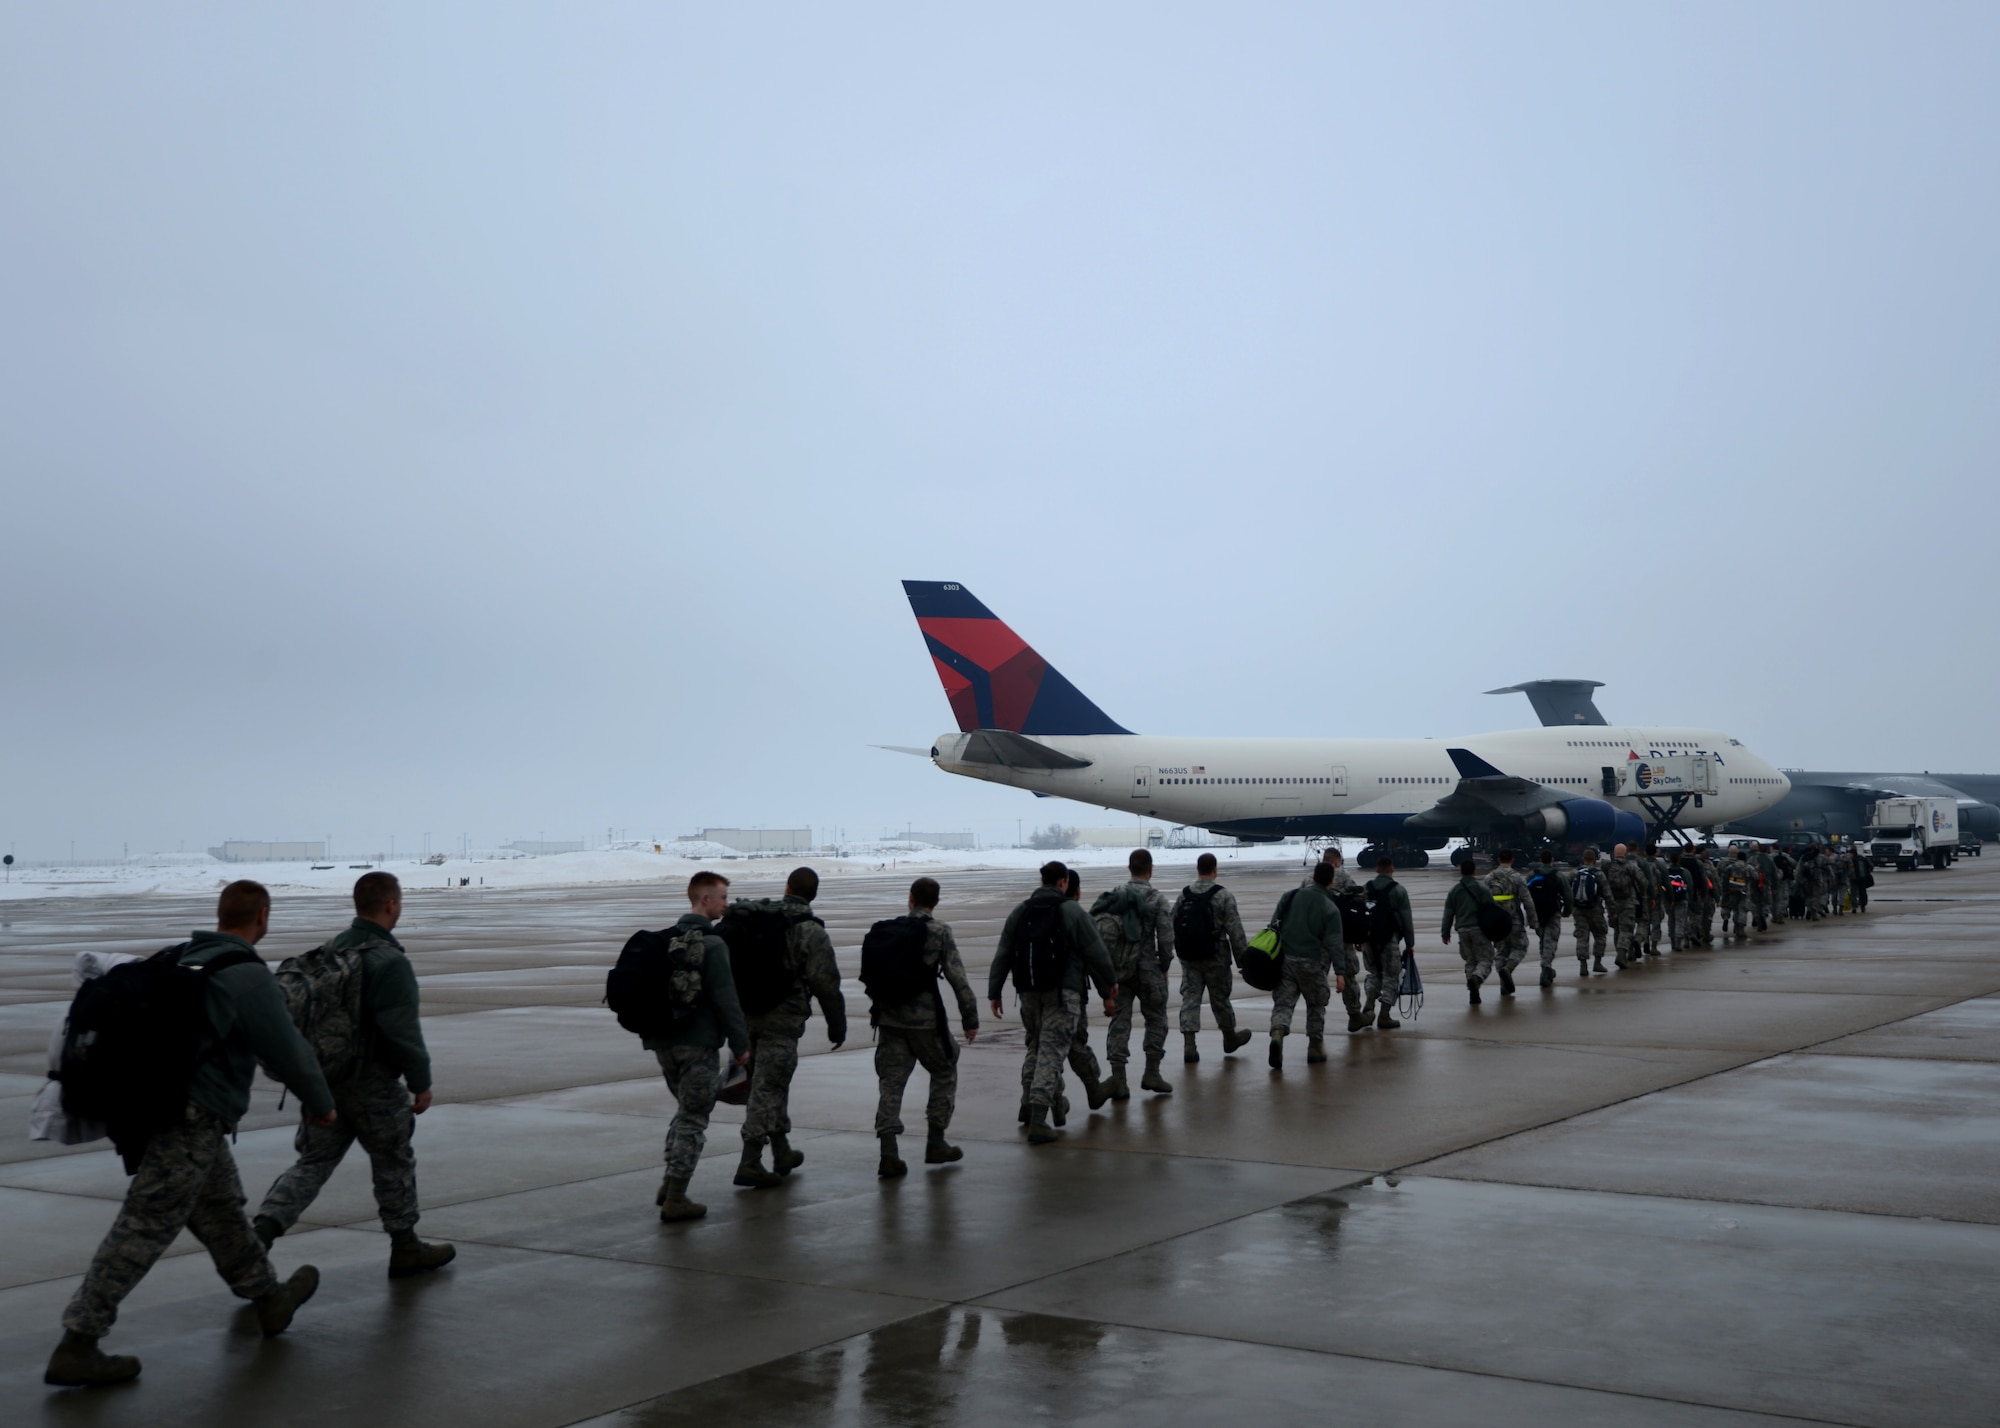 Nearly 300 Airmen from Hill's active duty 388th Fighter Wing and Air Force Reserve 419th FW board a Boeing 747 en route to the Republic of Korea as part of a joint deployment to provide stability and security in the Asia-Pacific region. (U.S. Air Force photo by Senior Airman Justyn Freeman)
